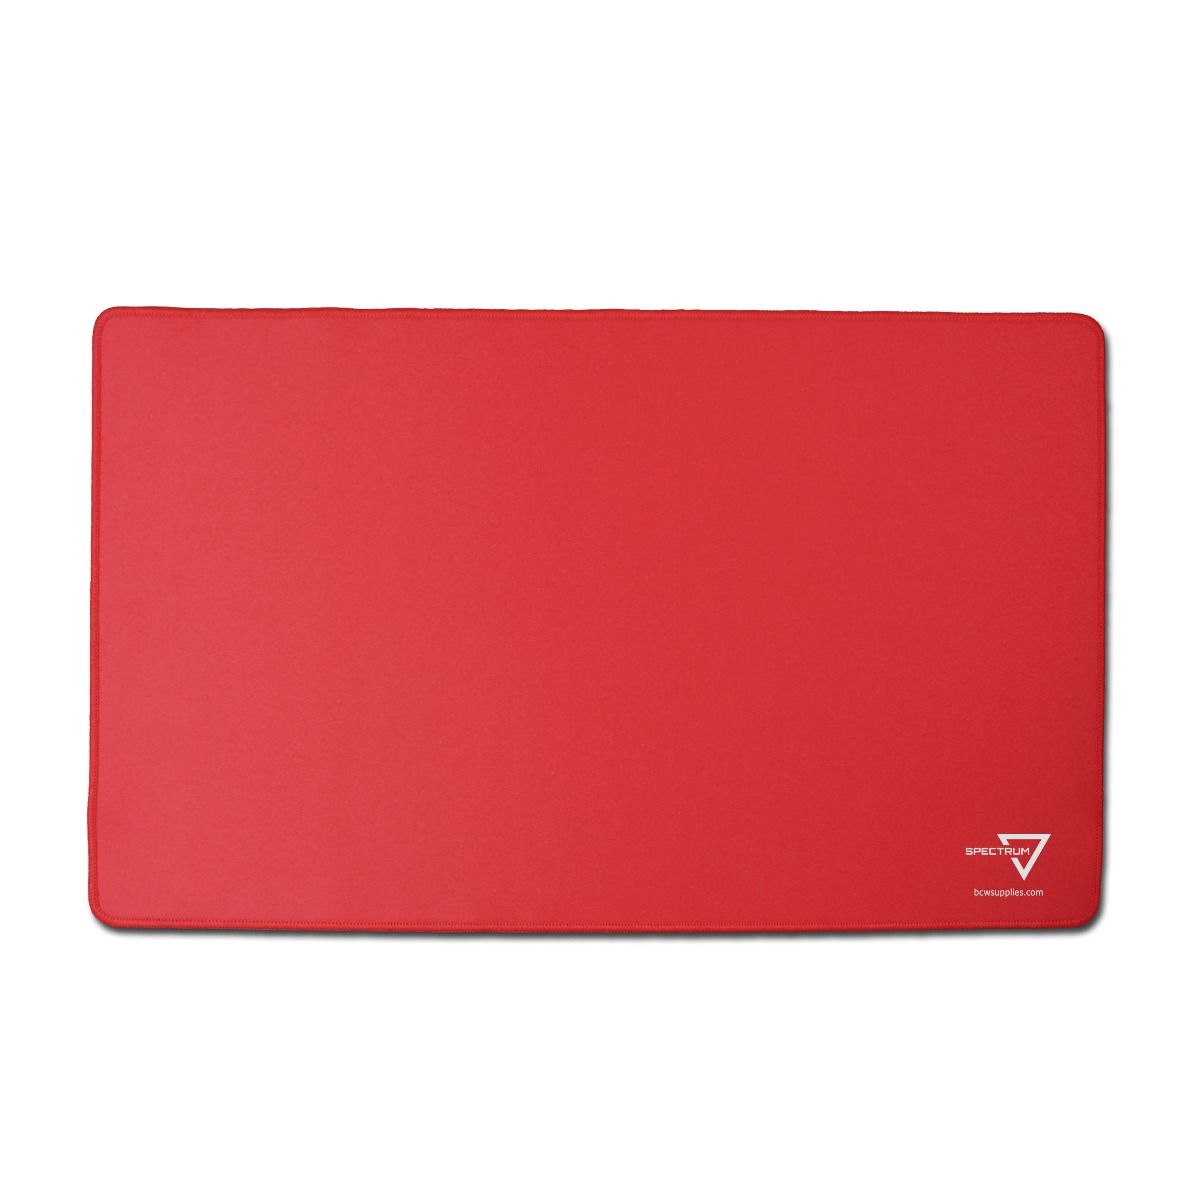 BCW Spectrum Playmat with Stitched Edging - Red | CCGPrime